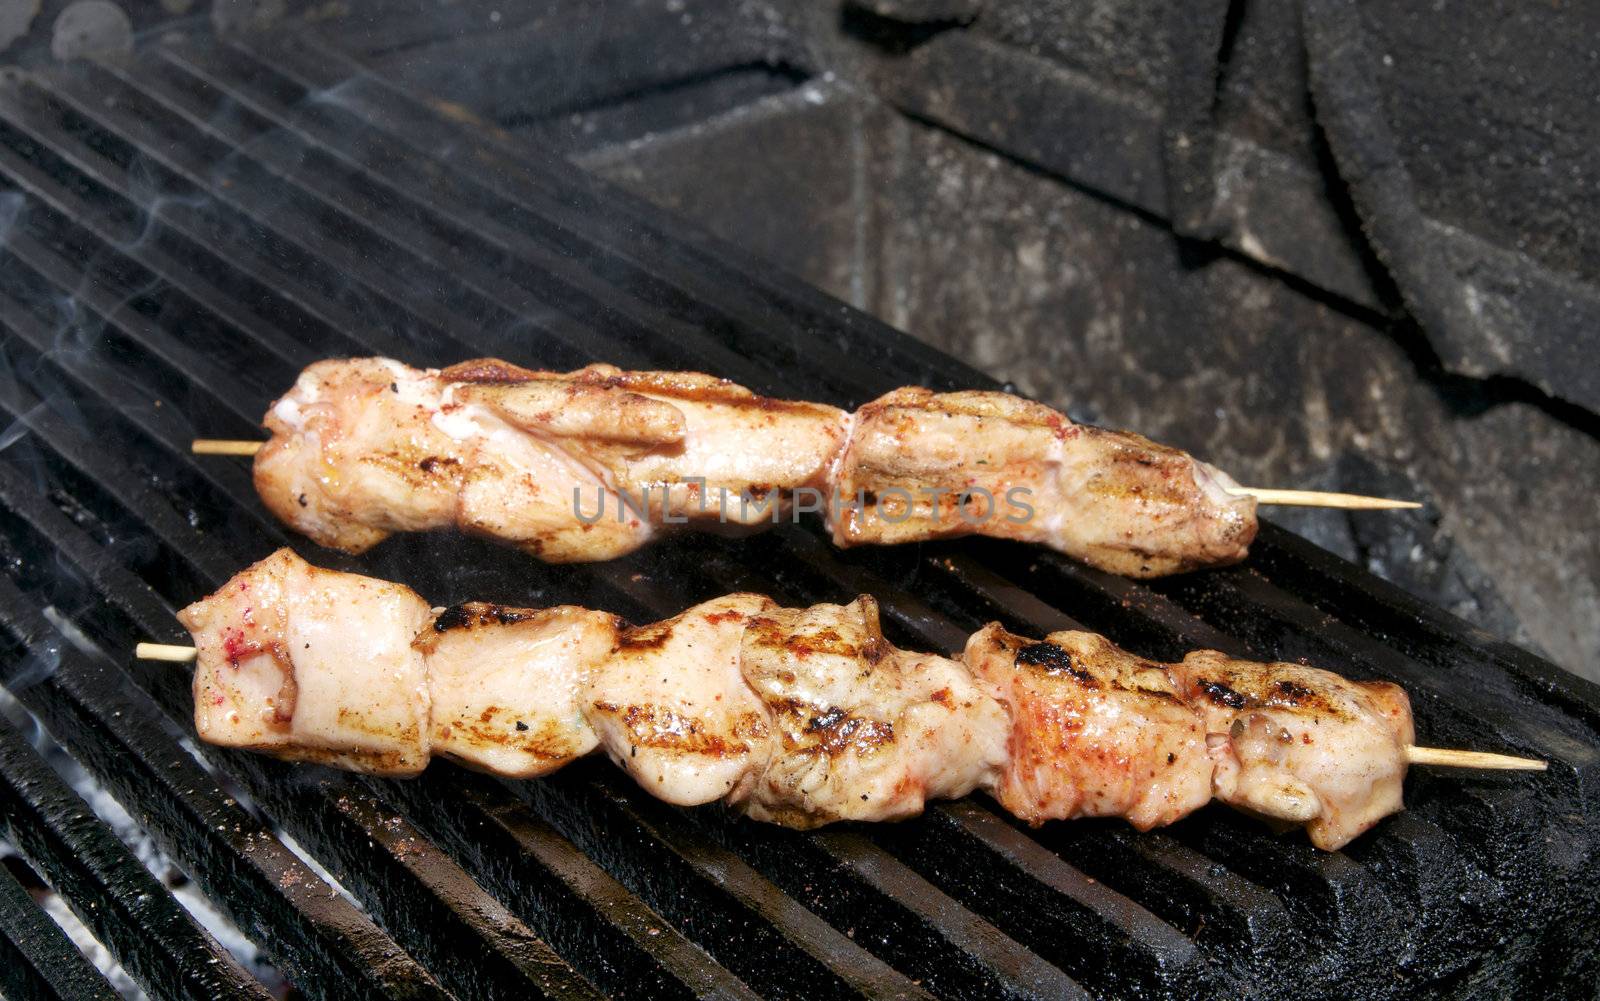 Chicken kebabs on the grill in the restaurant